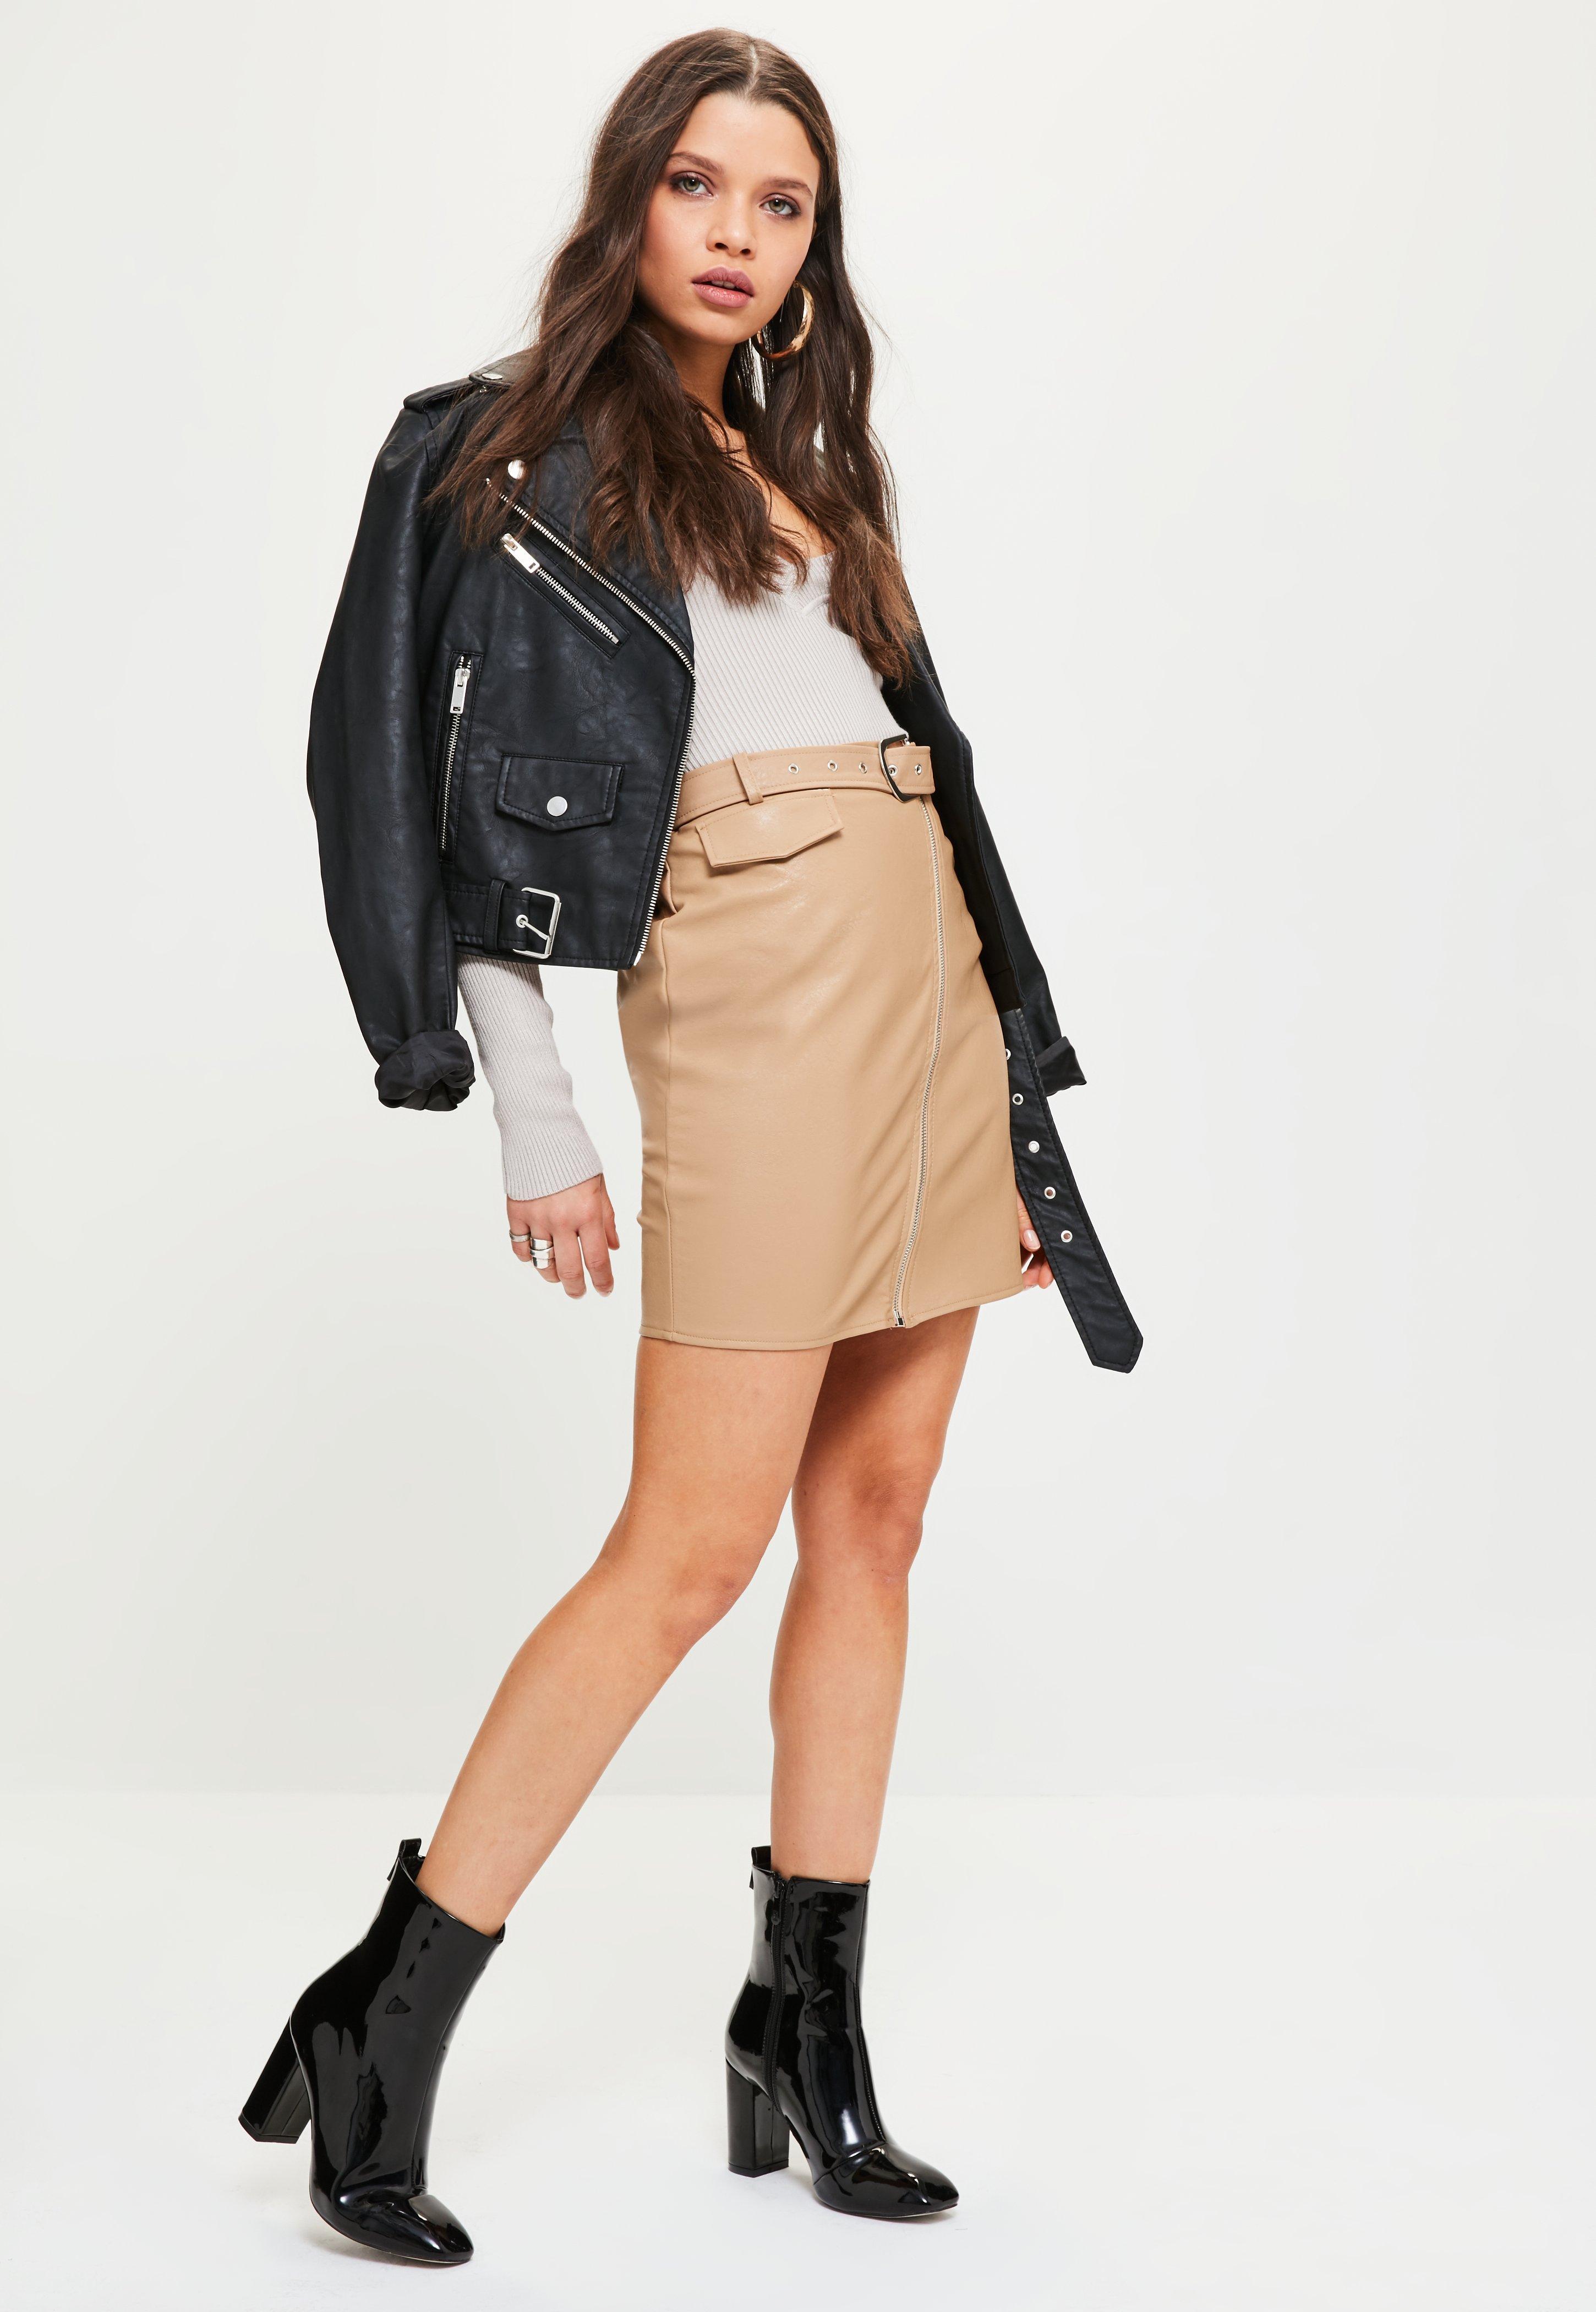 Lyst - Missguided Nude Faux Leather Biker Detail Mini Skirt in Natural